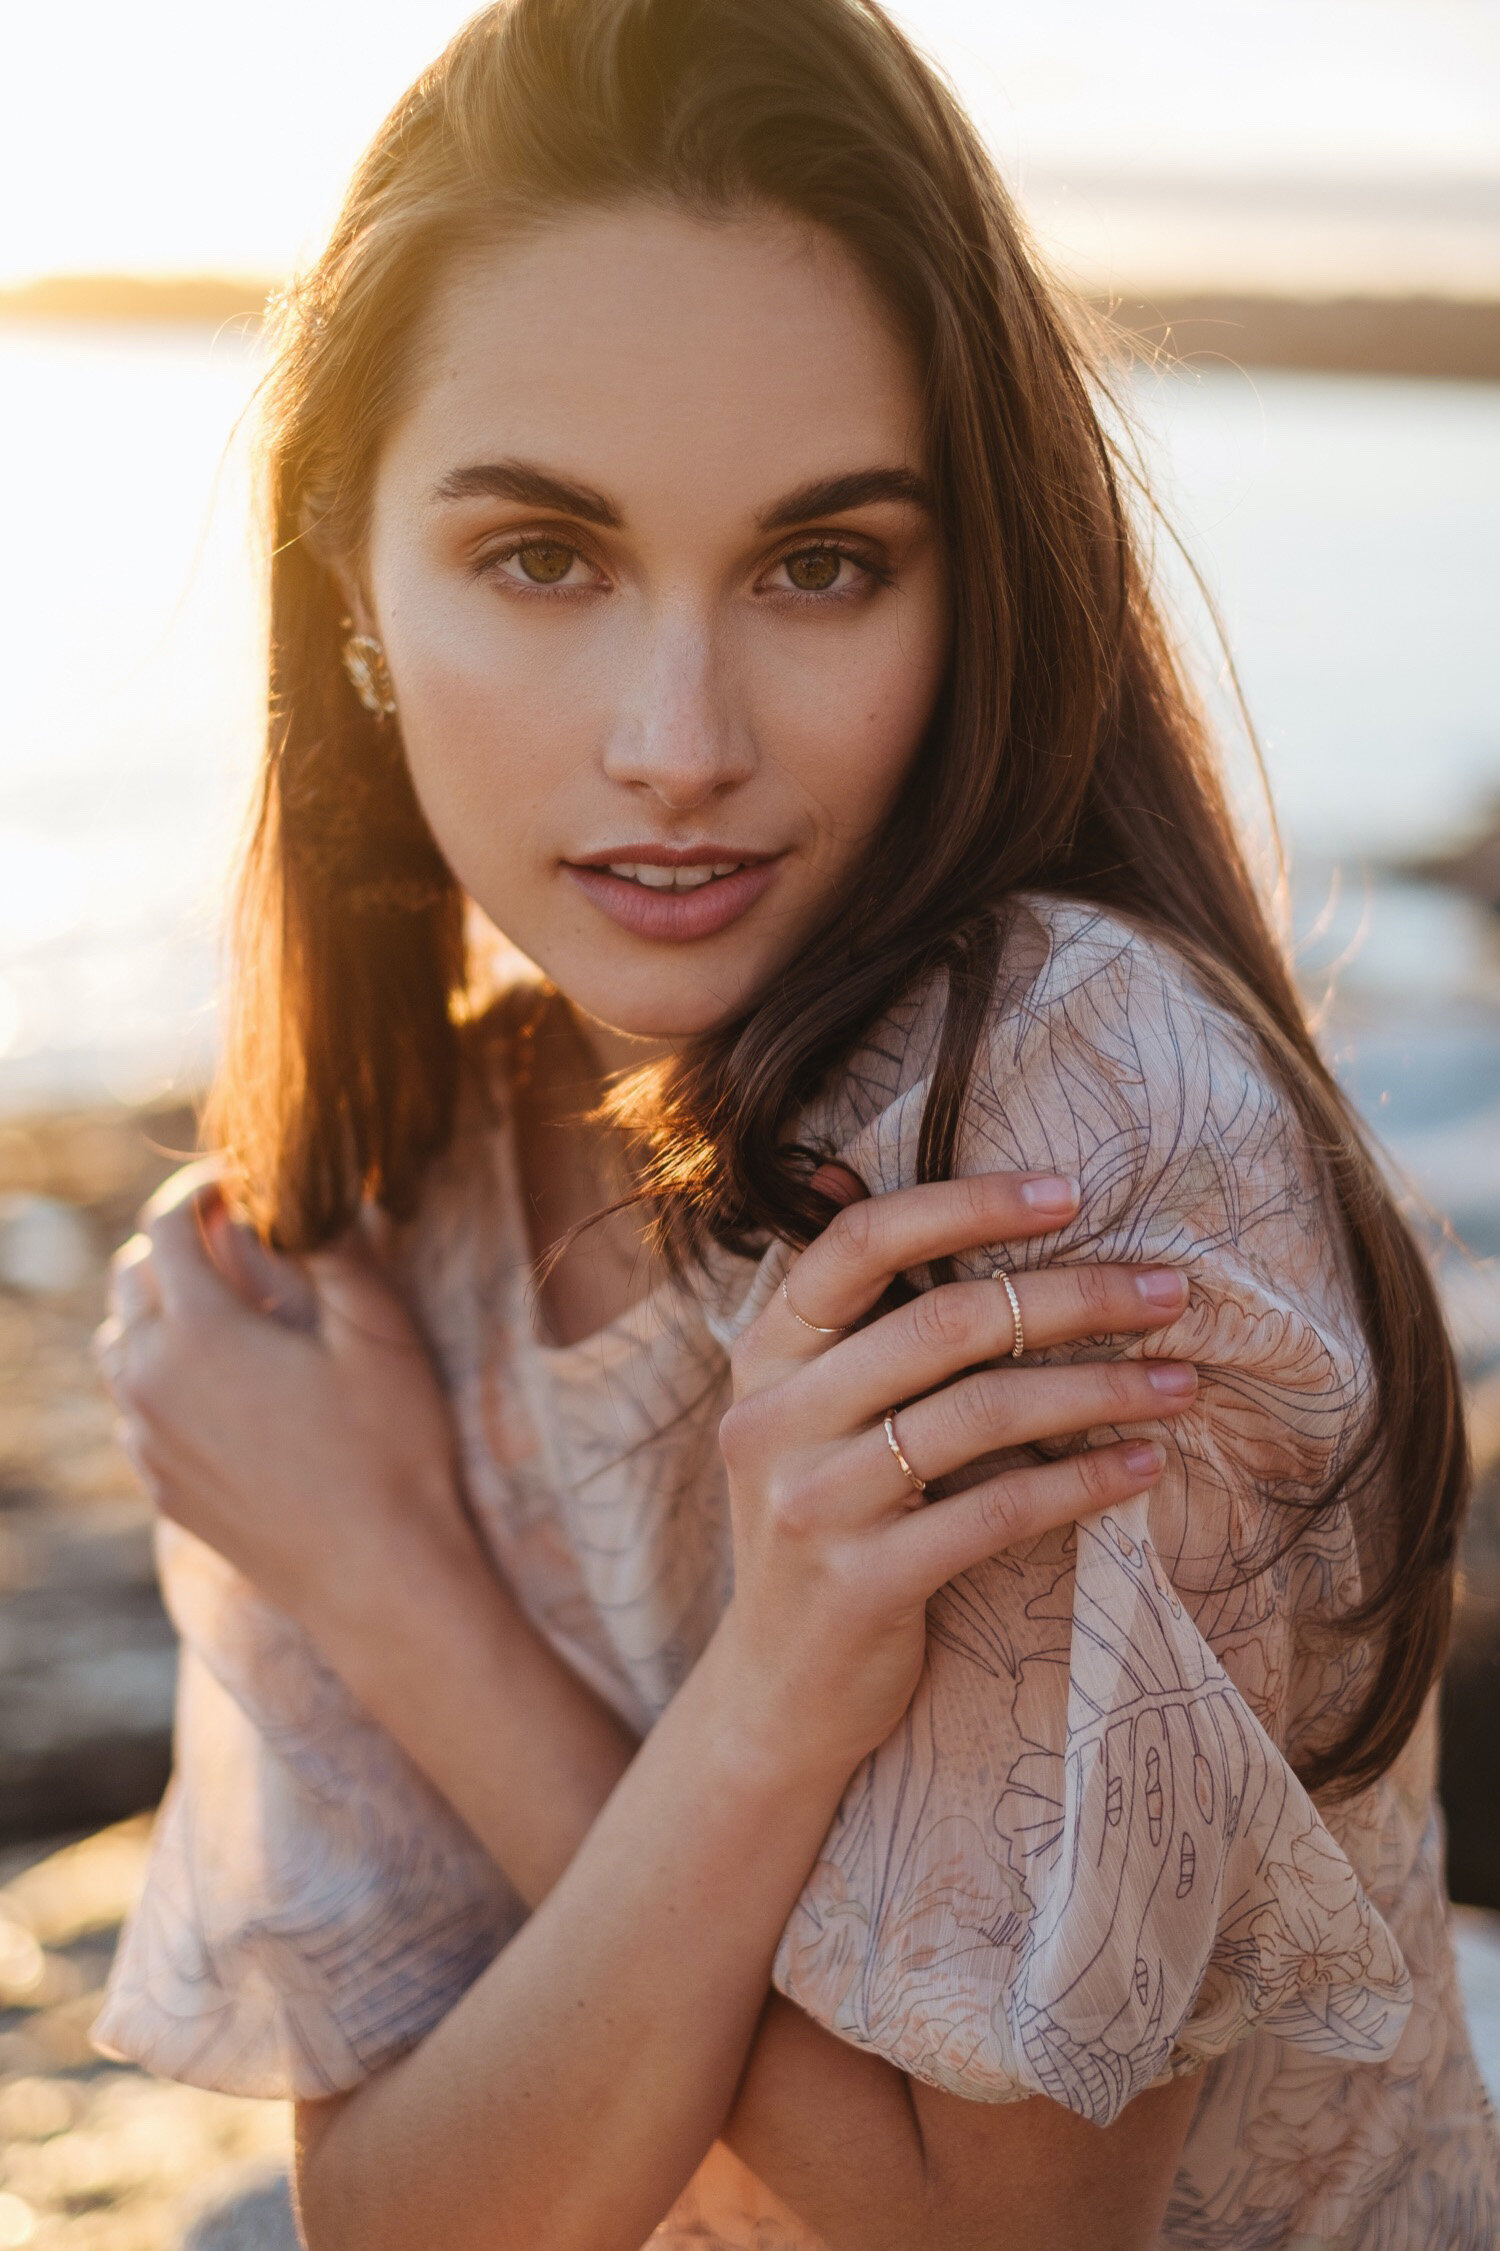 Fujifilm X-T4 + XF 35mm f1.4 Golden Hour Portrait Photography — JULIA  TROTTI | Photography Tutorials + Camera and Lens Reviews